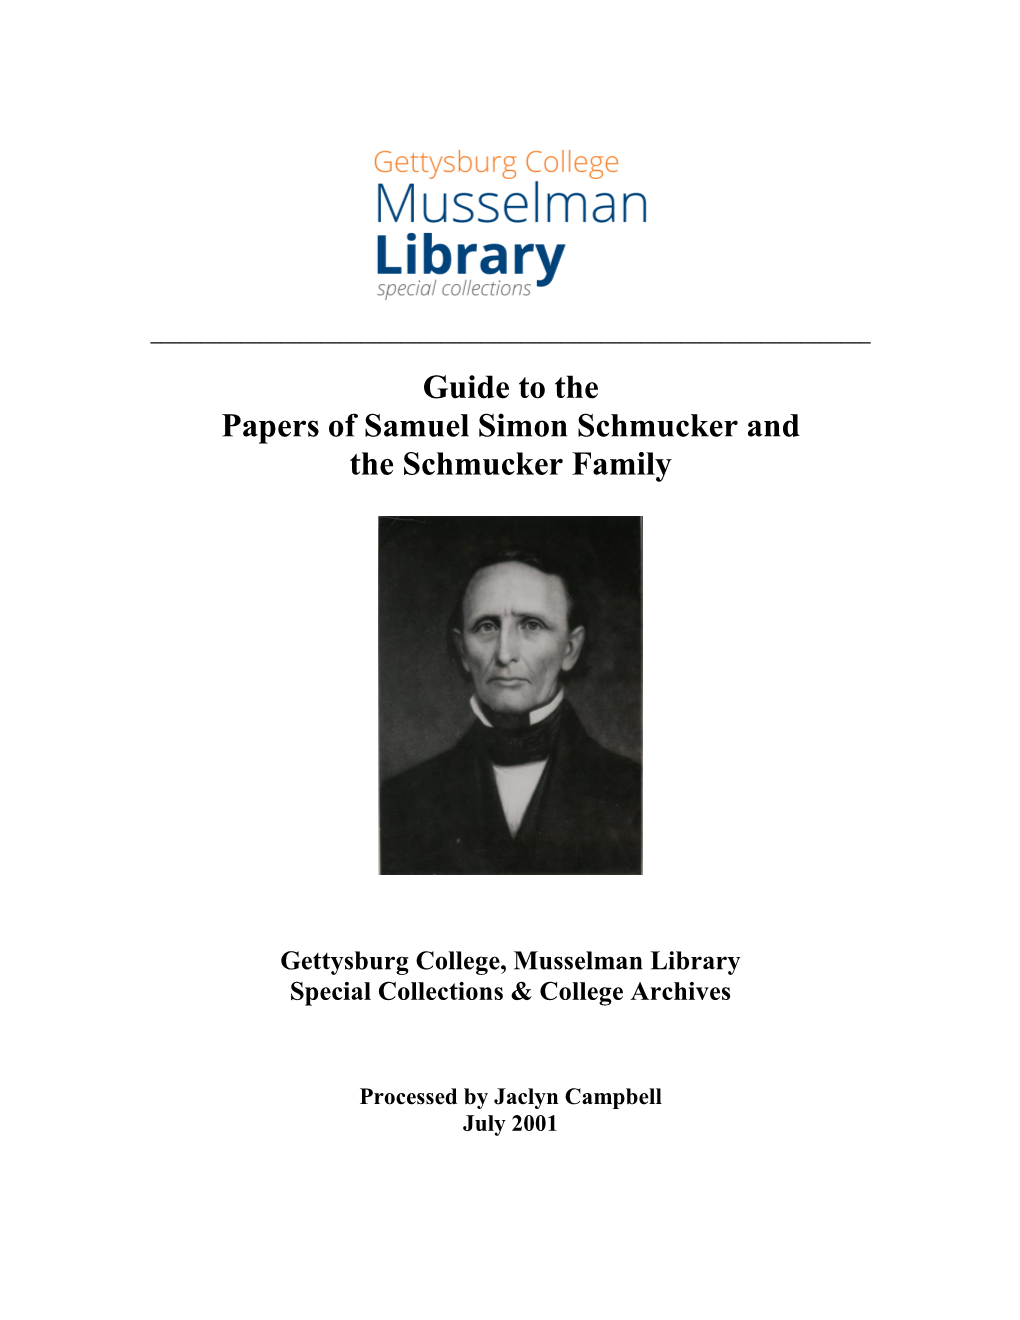 MS-023: the Papers of Samuel Simon Schmucker and the Schmucker Family (7 Boxes, 1.89 Cubic Feet)